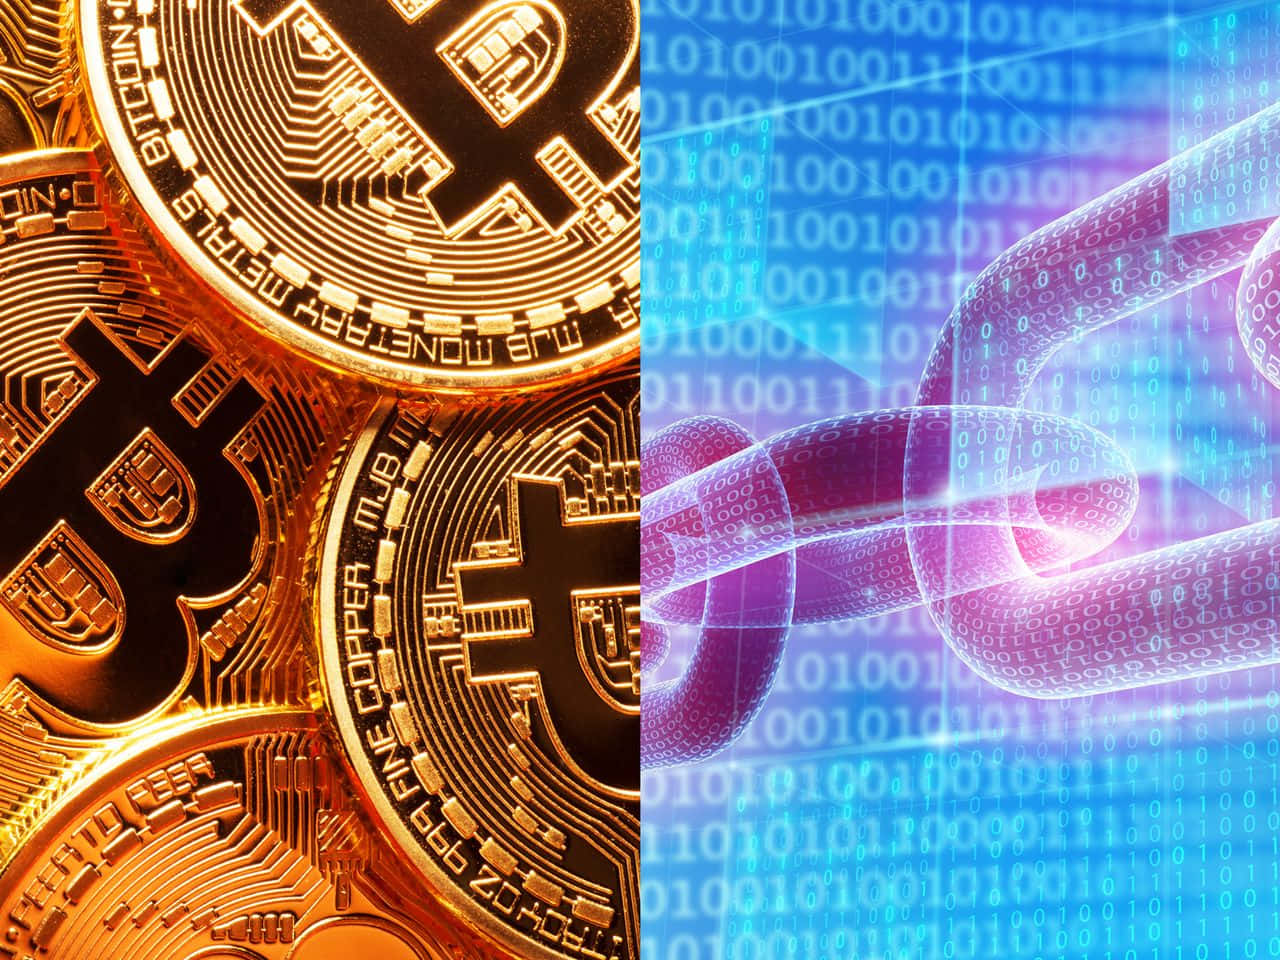 Cryptic Crptocurrency Bitcoin System Wallpaper